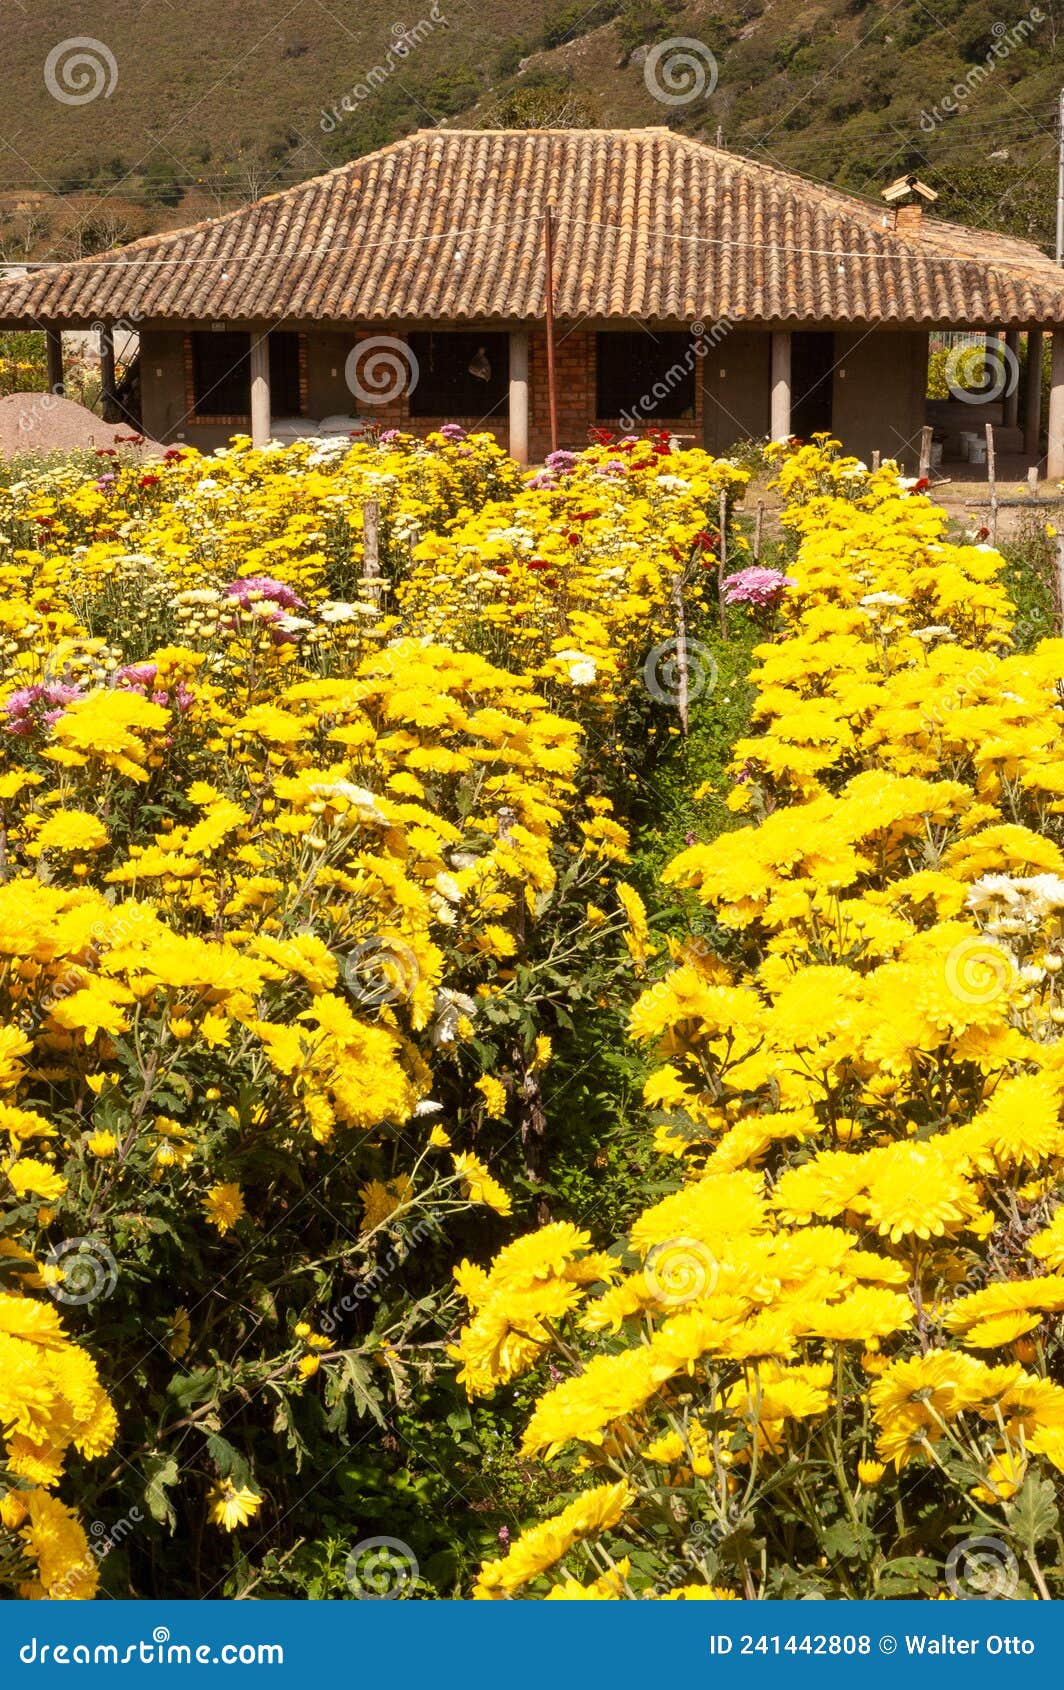 agricultural production of flowers en los andes south america